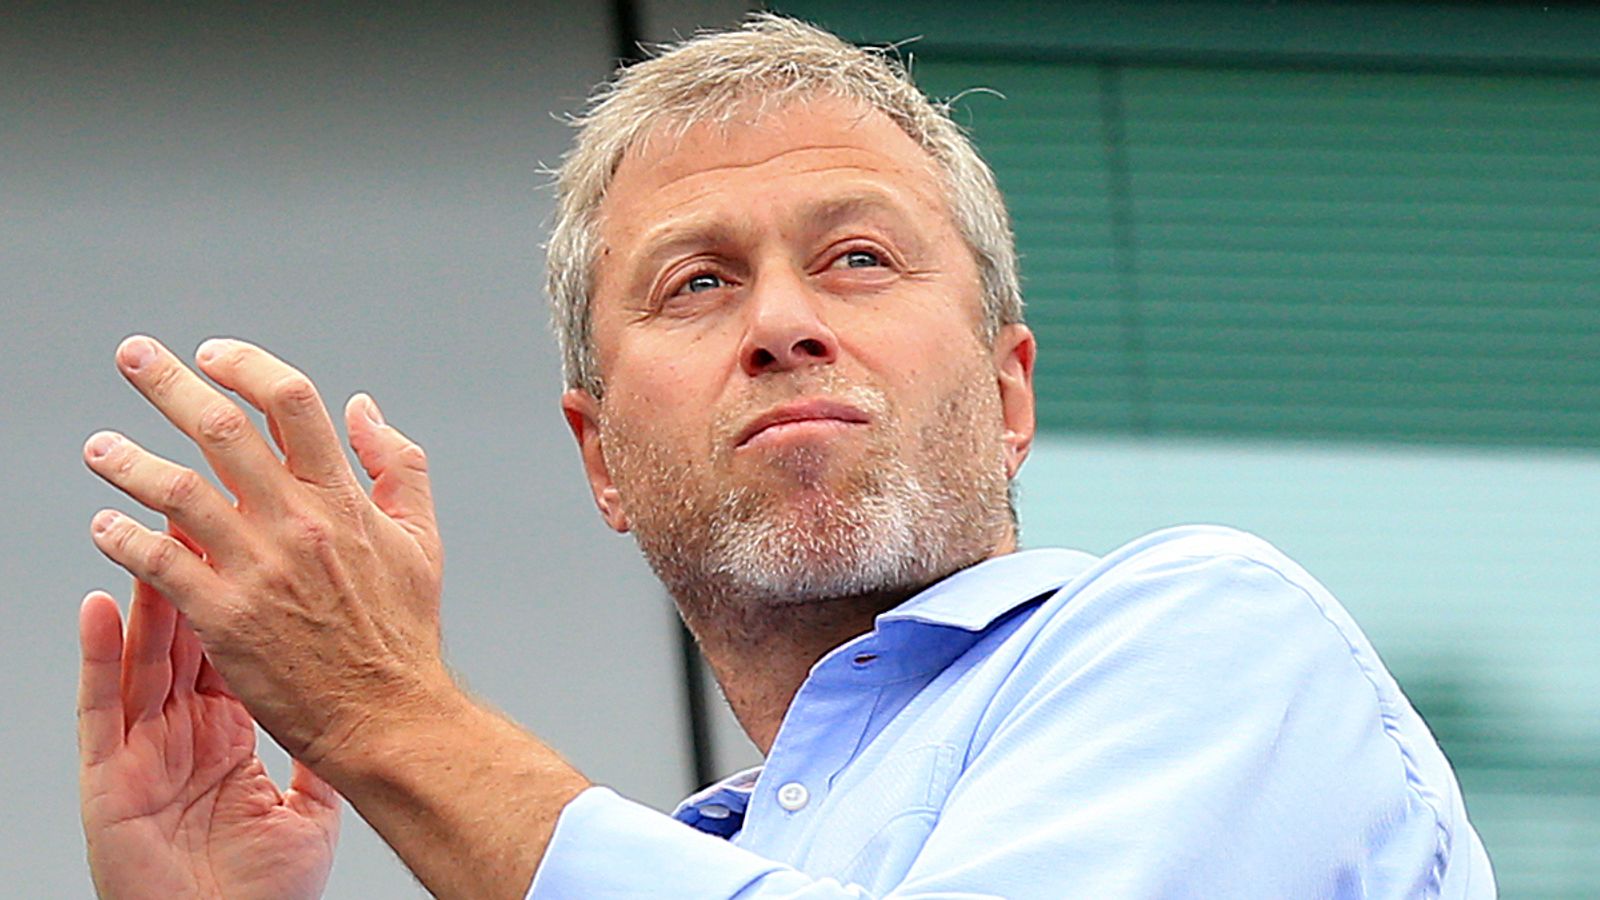 Chelsea owner Roman Abramovich sanctioned by UK Government